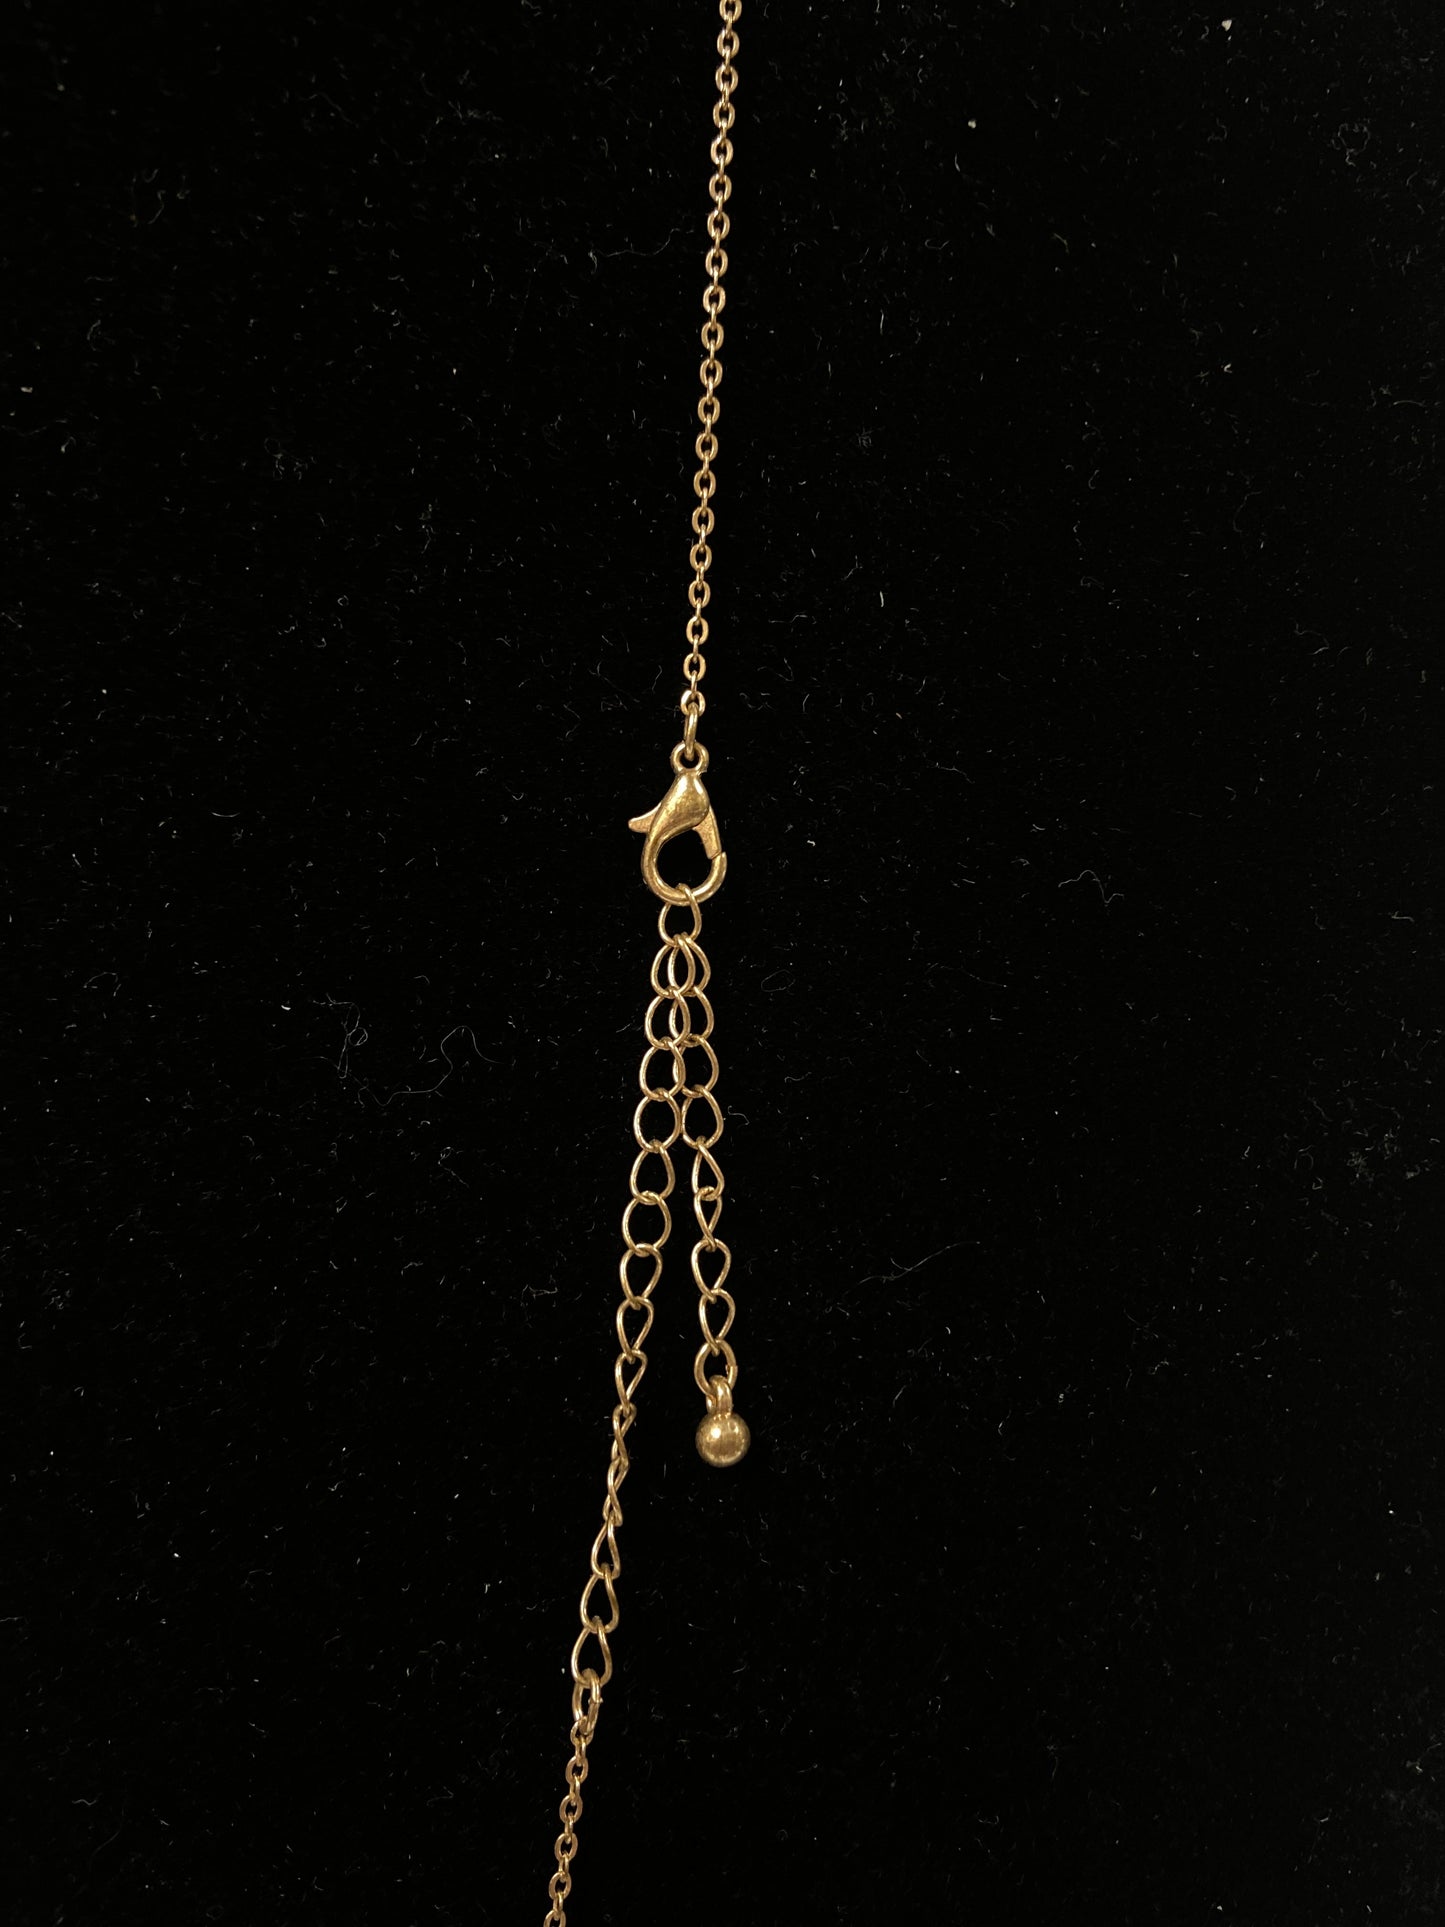 Necklace Chain By Cmc  Size: 1